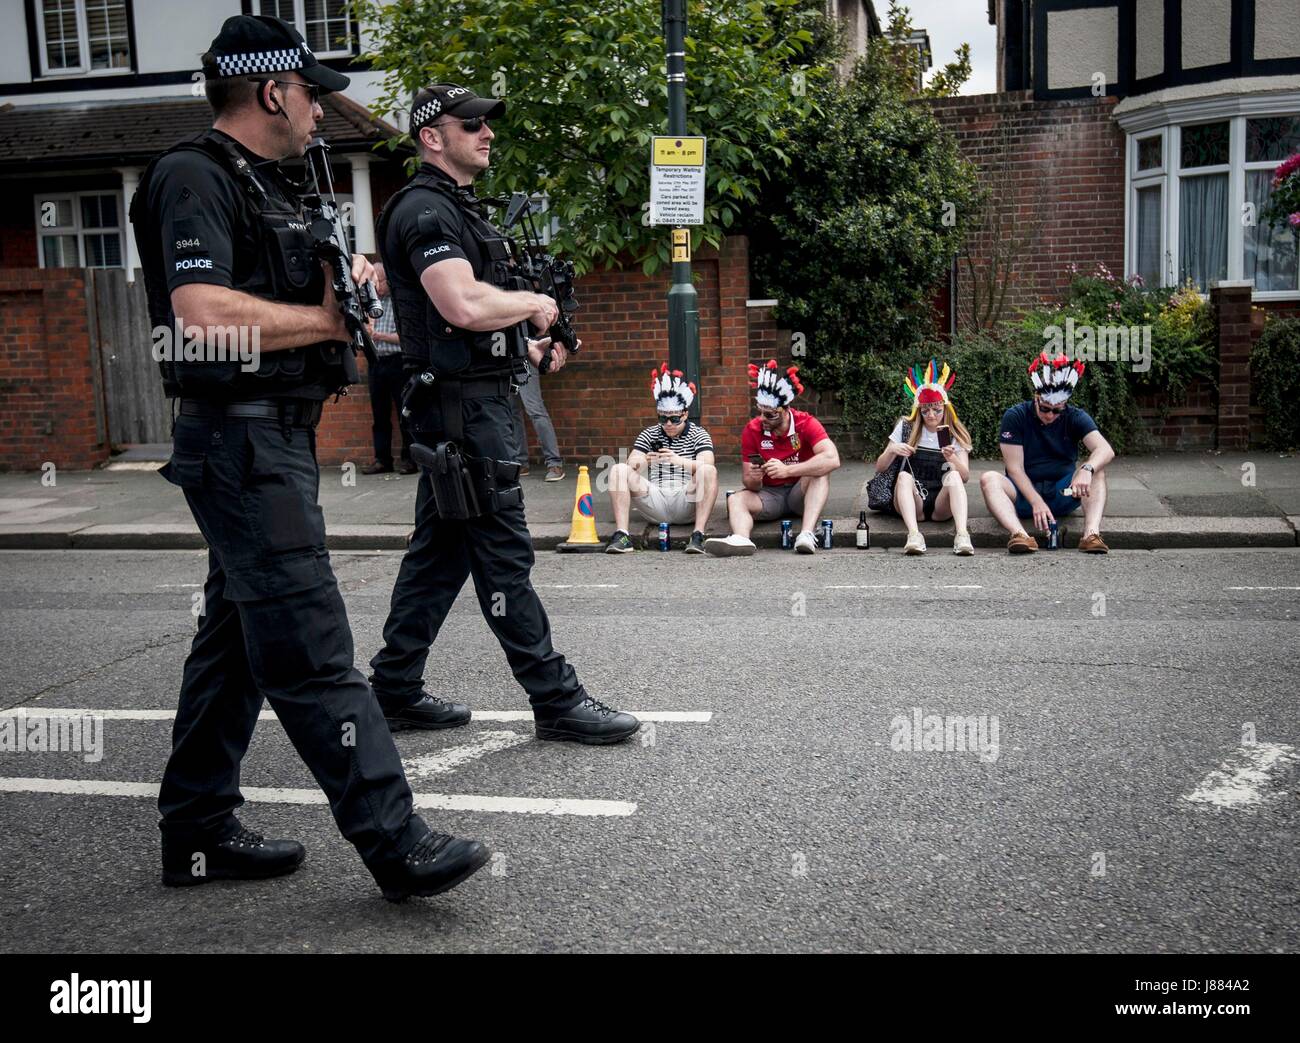 Armed police officers patrol outside the Aviva Premiership Rugby Final between Exeter and Wasps at Twickenham, as Britons have been encouraged to enjoy their Bank Holiday weekend as planned after police reviewed security at more than 1,300 events following the Manchester terror attack. Stock Photo